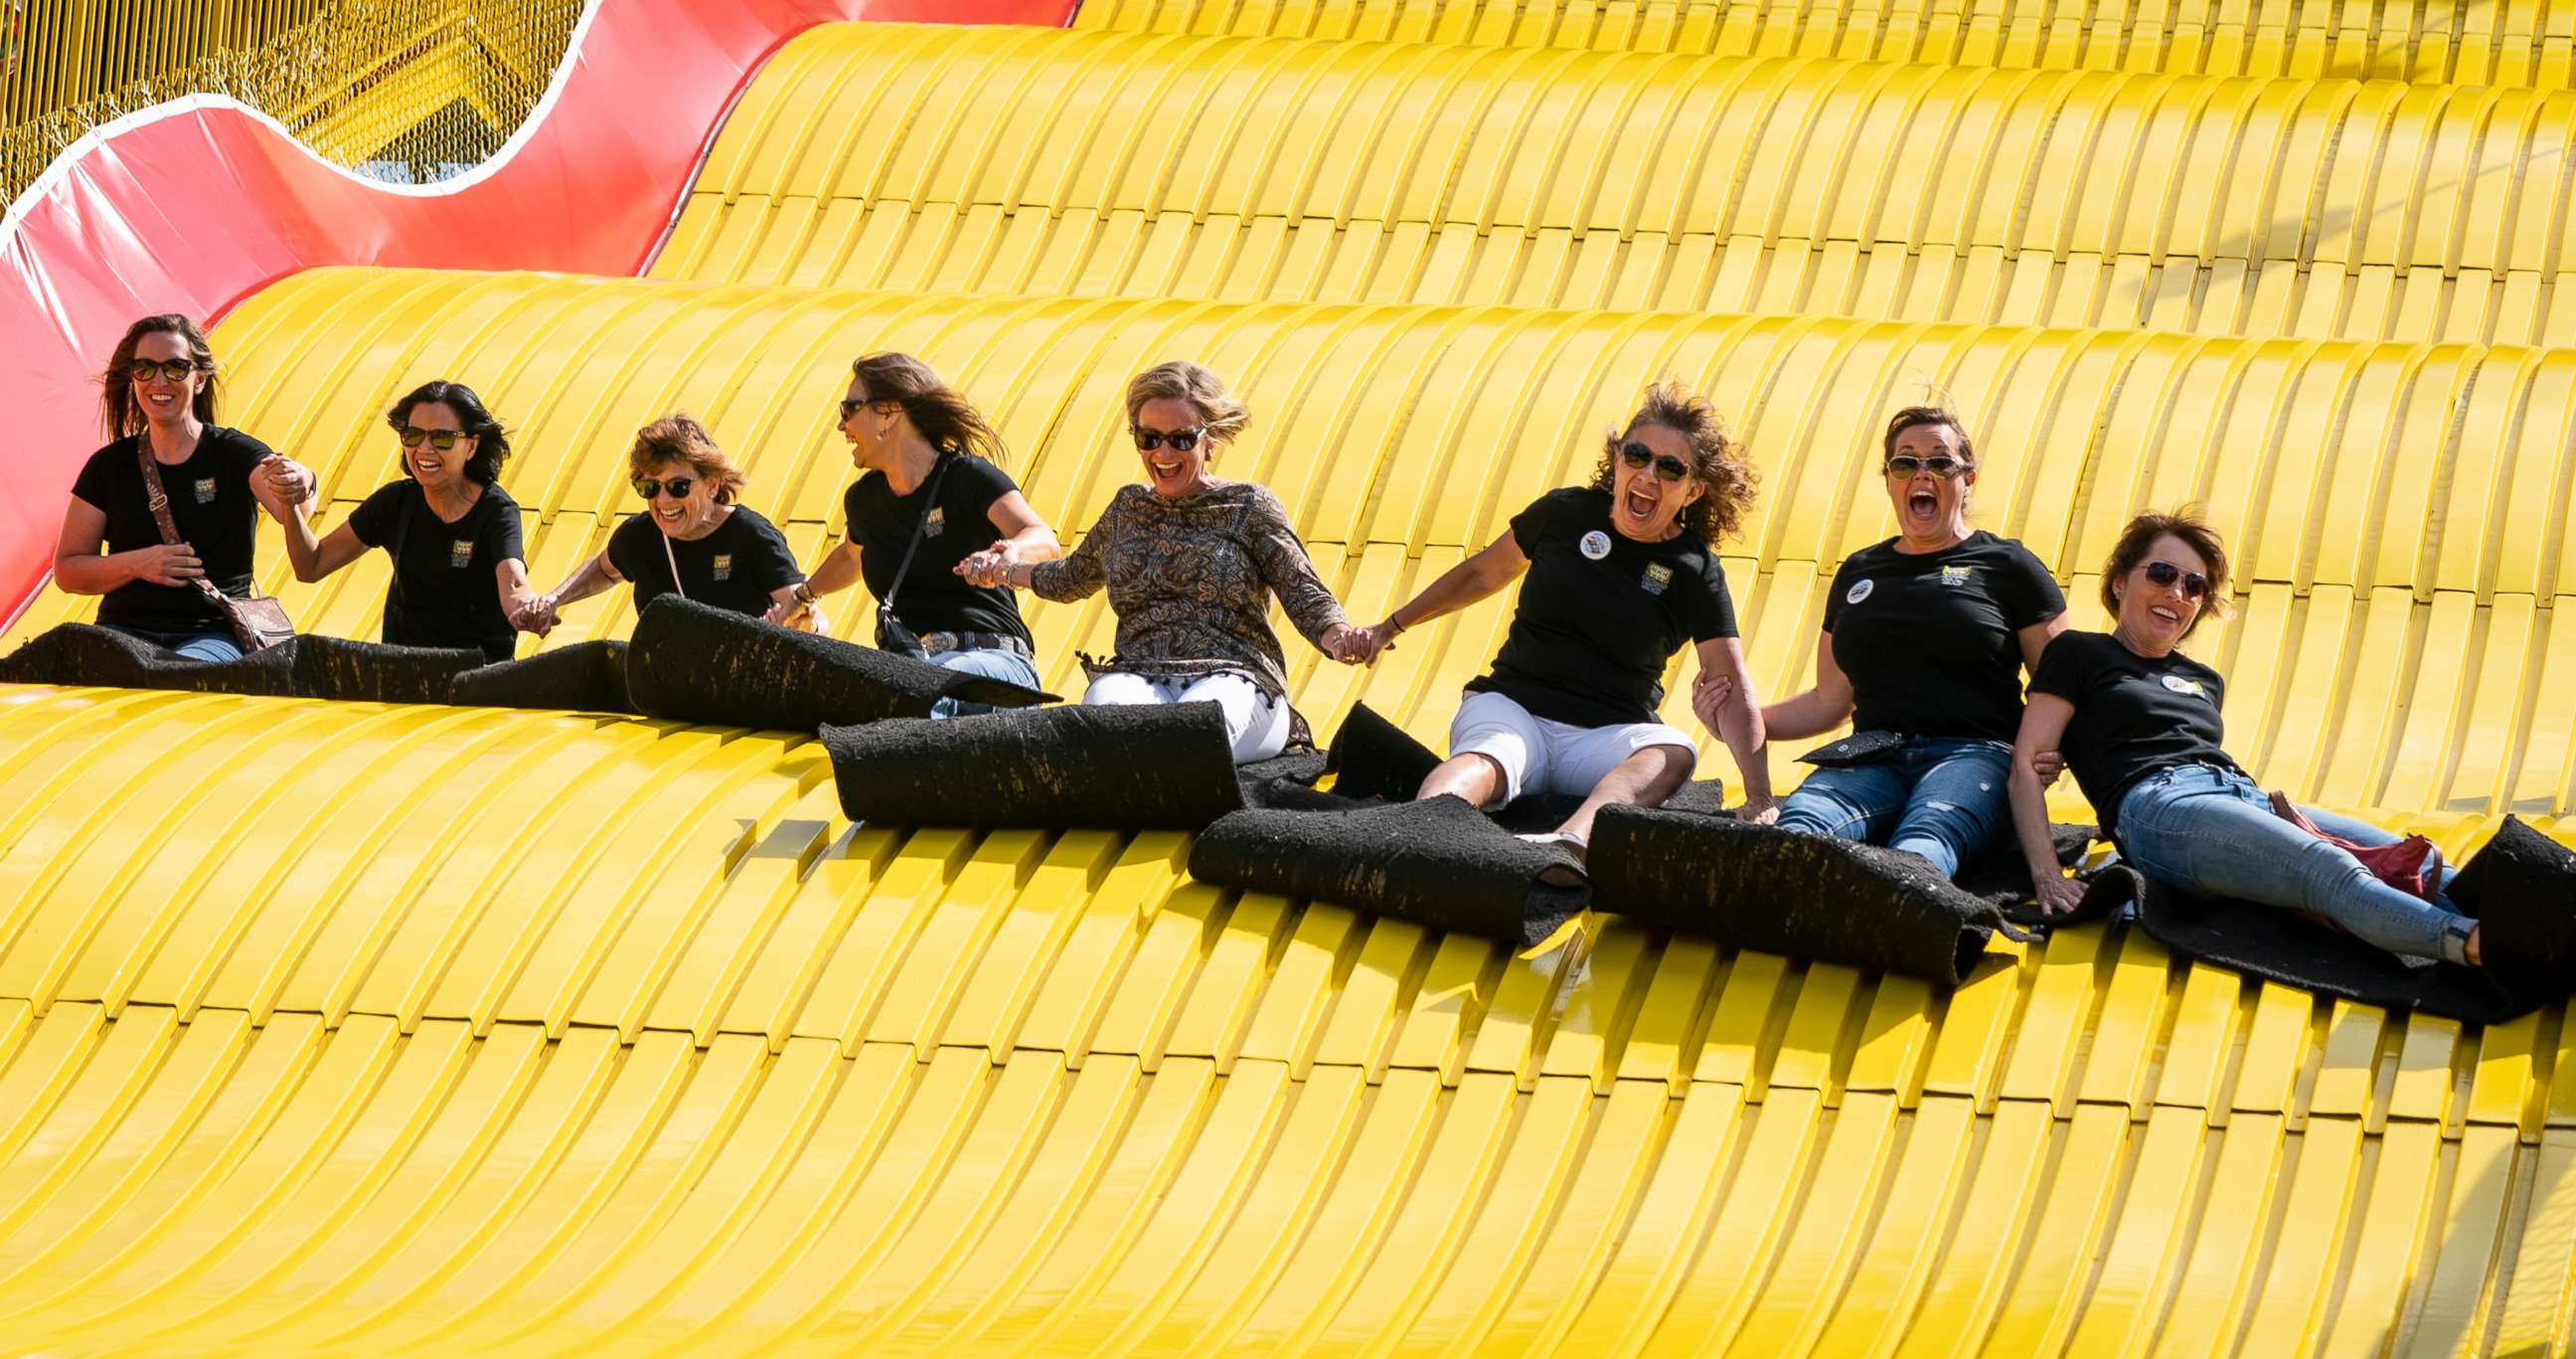 PHOTO: A group of ladies ride the Giant Slide together during the first day of the Minnesota State Fair in Falcon Heights, Minn., Aug. 22, 2019.